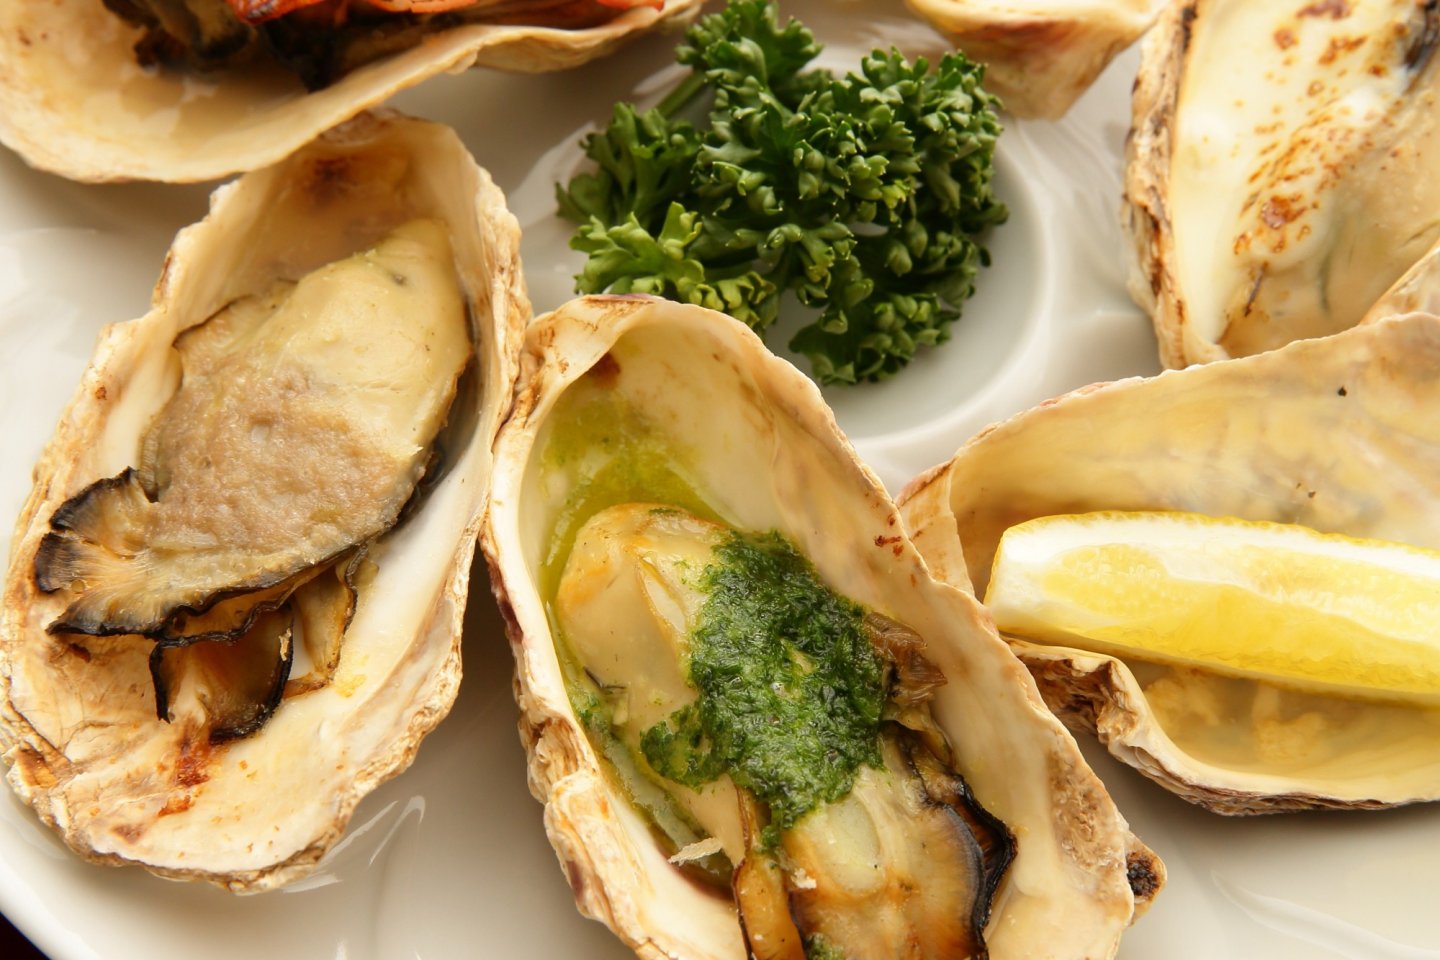 The oyster sampler is a signature dish being perfected for nearly a century